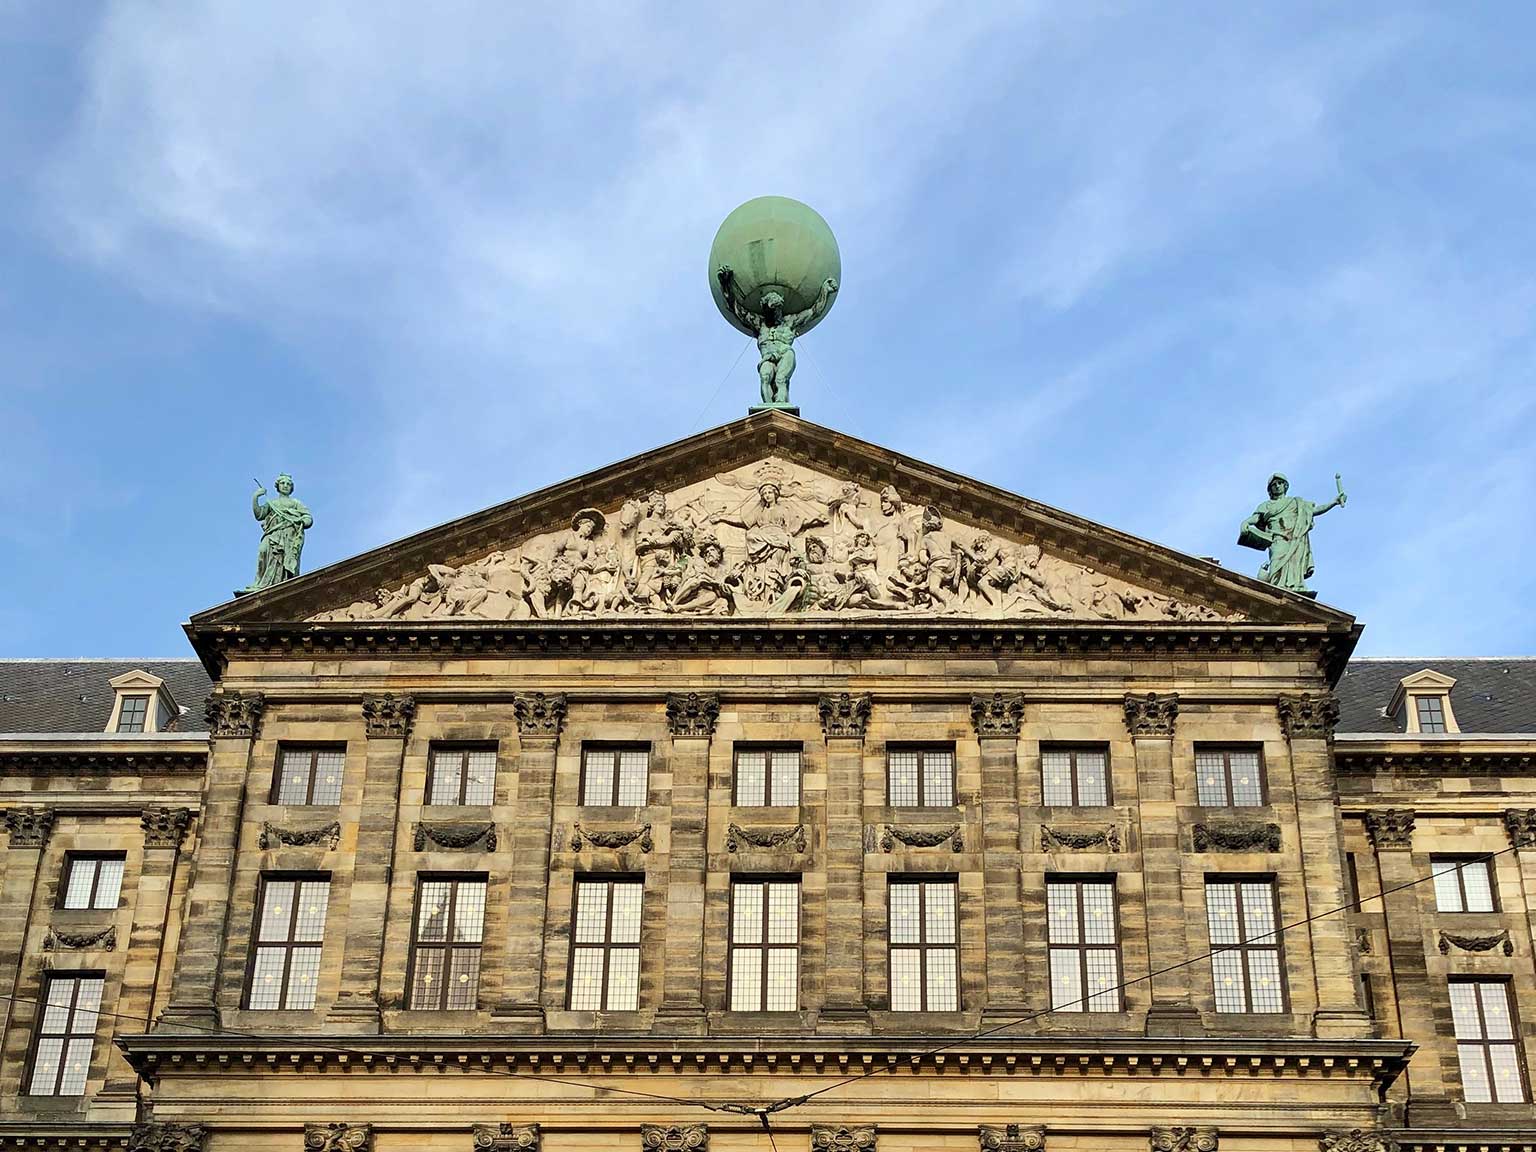 Tympanum on the back of the Royal Palace, Nieuwezijds Voorburgwal, Amsterdam